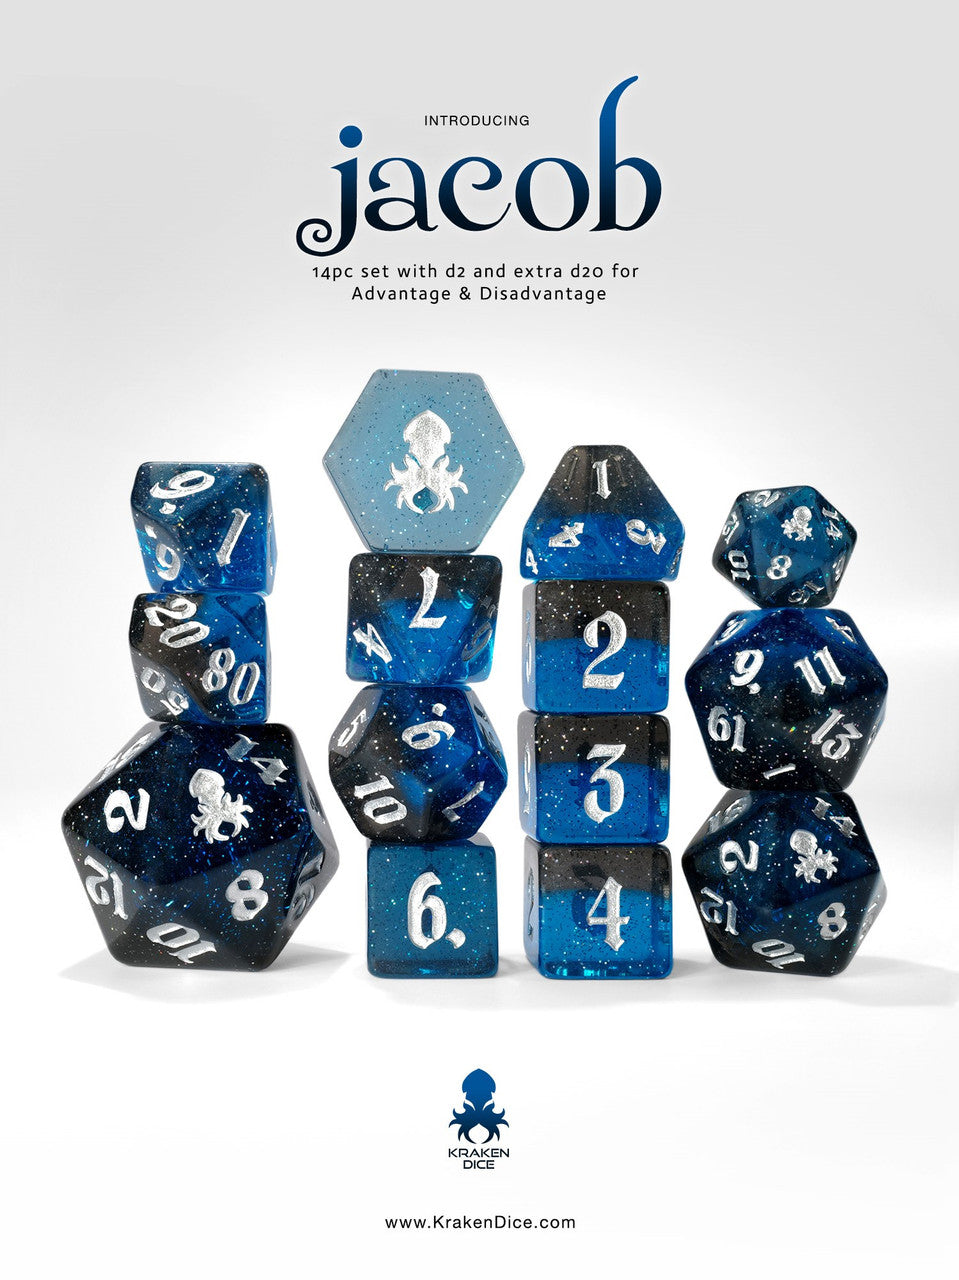 Jacob 14pc - Limited Run - Silver Ink Dice Set